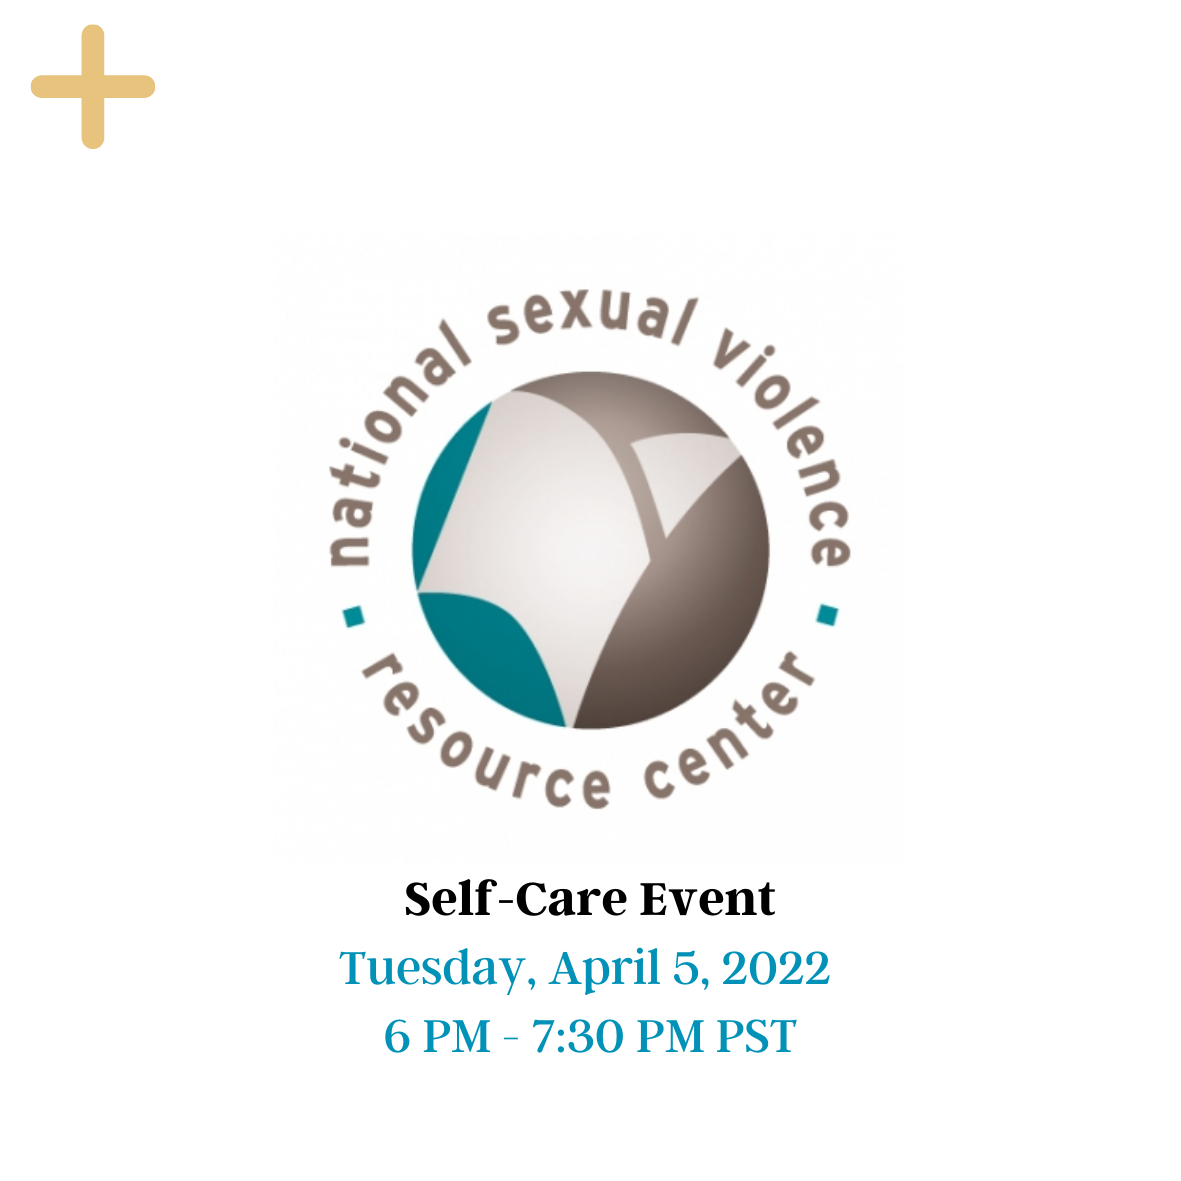 Self care event cover page with the National Sexual Violence Resource Center logo displayed. The yellow button on the top can be clicked and will provide more information. The picture has date at the bottom: Tuesday, April 5, 2022, 6 PM - 7:30 PM PST